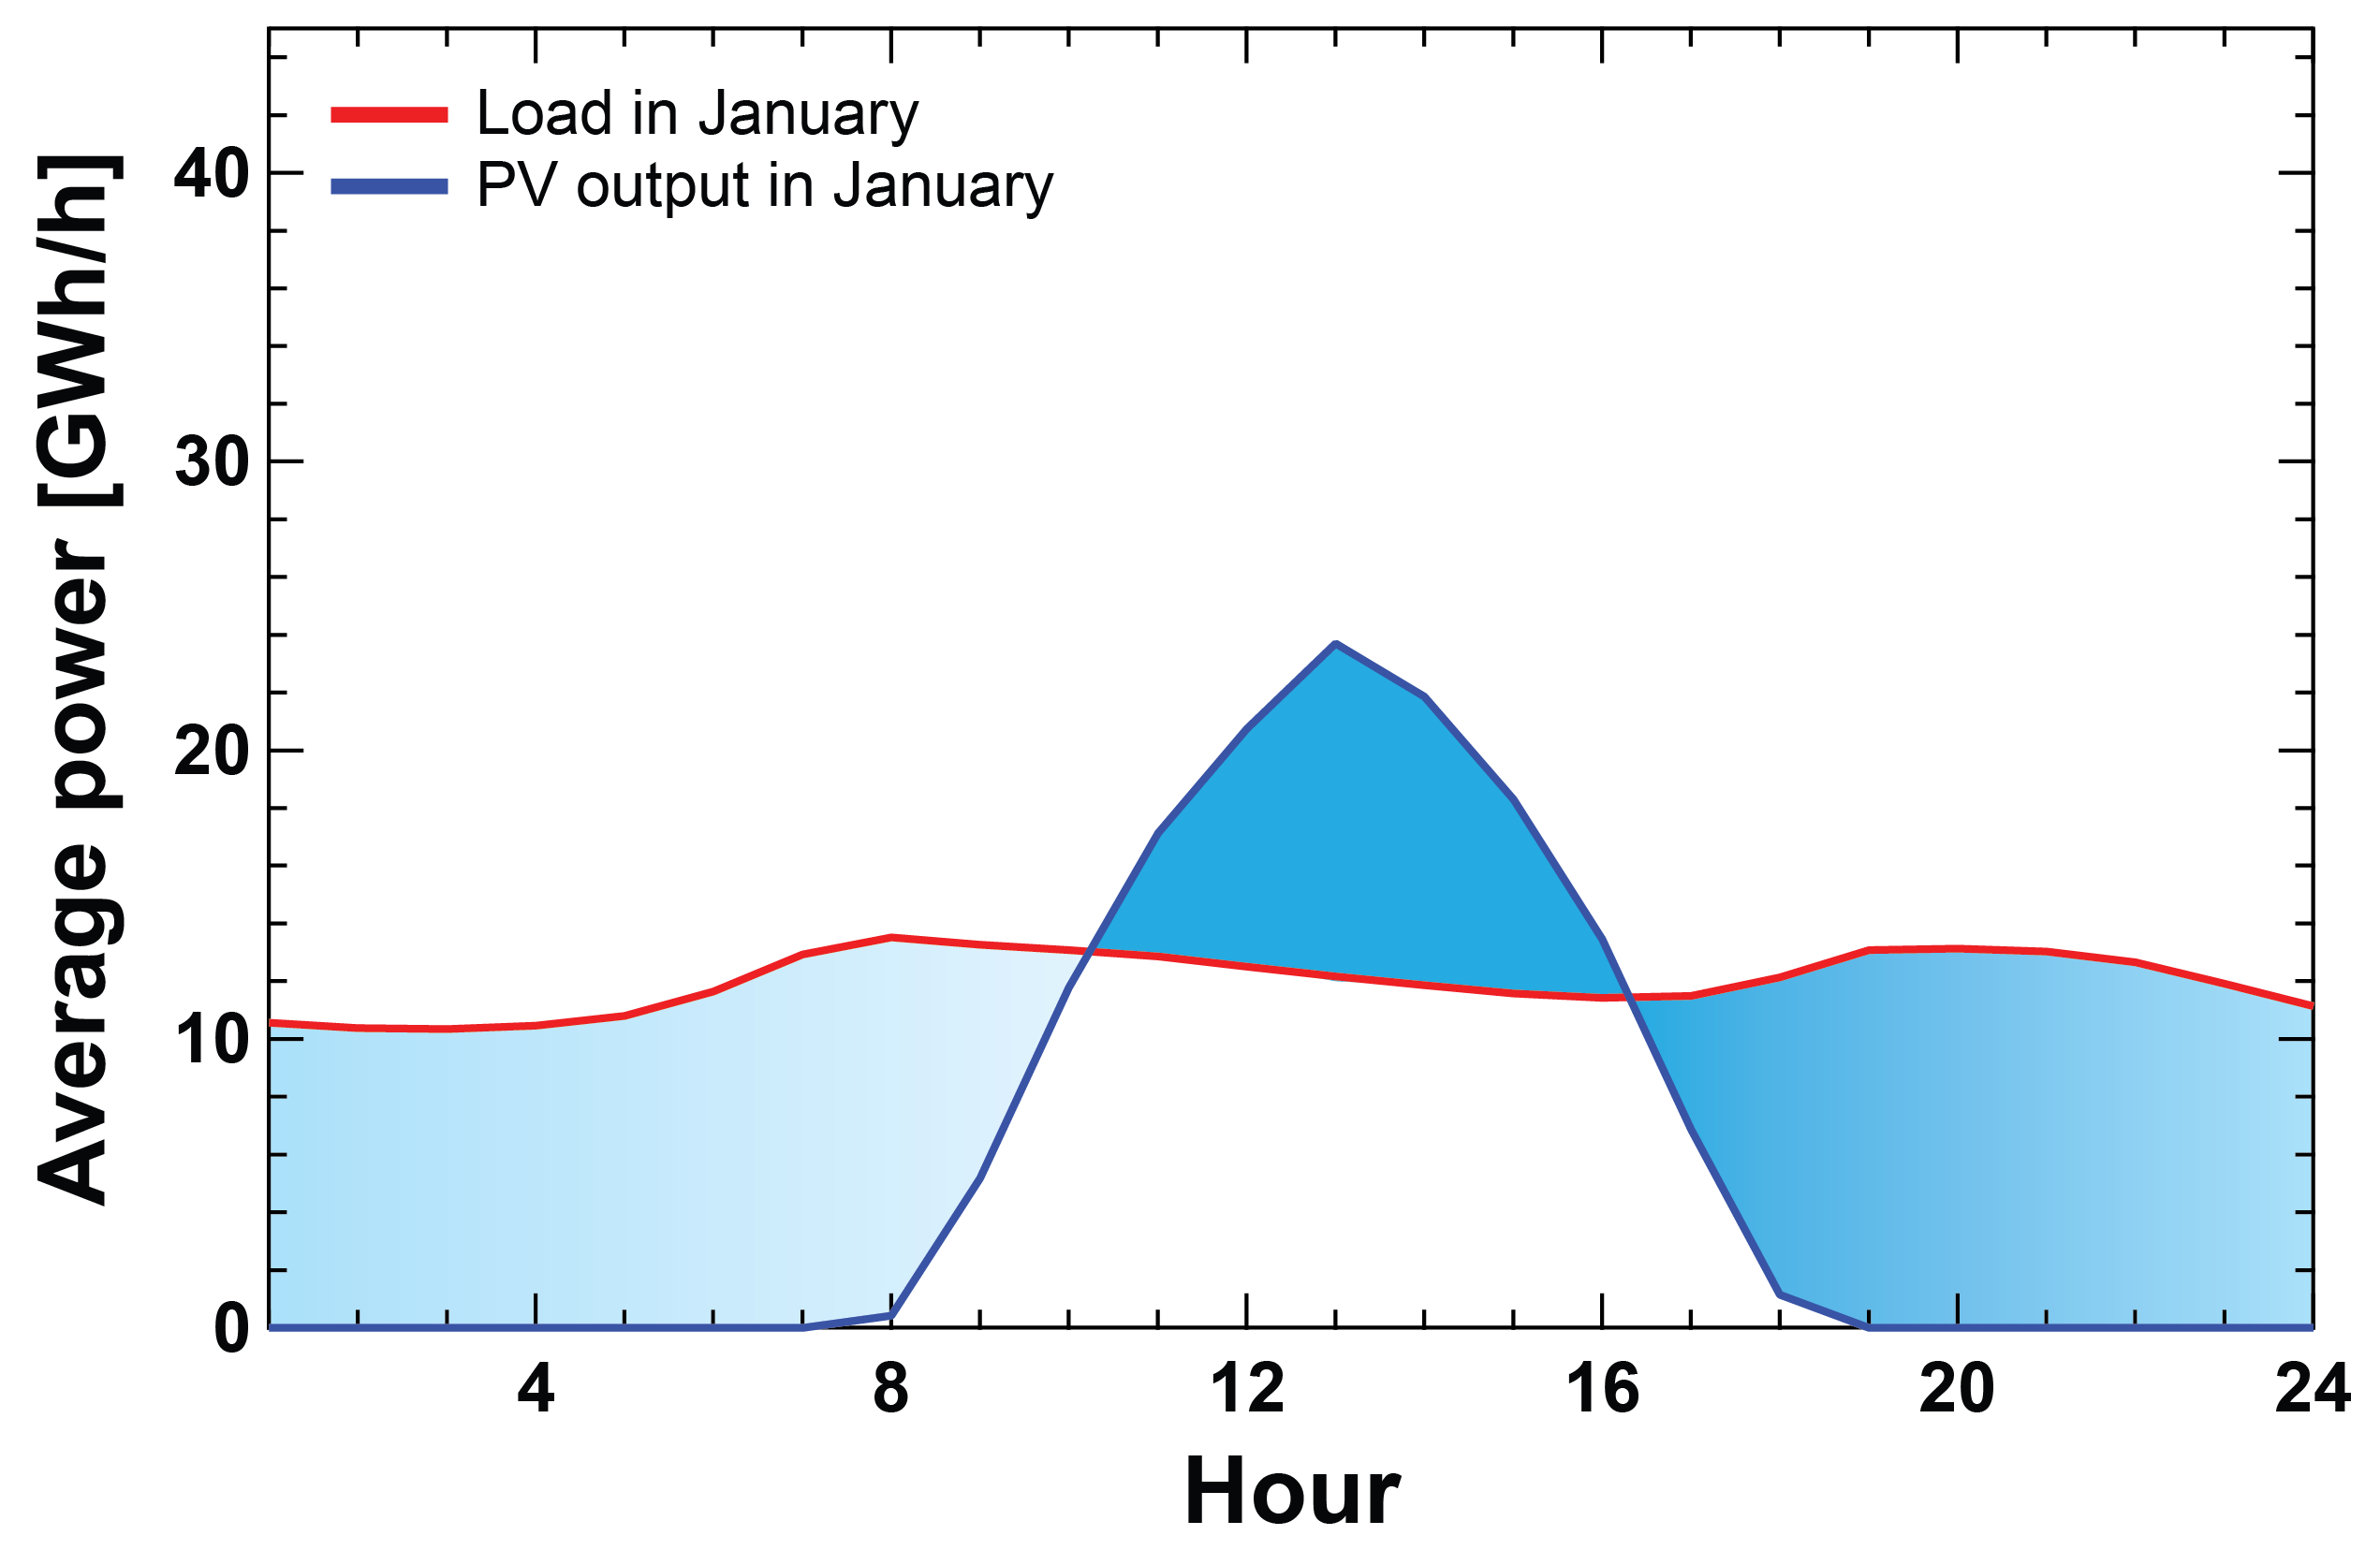 Plot of daily load and solar availability profiles for North Central ERCOT